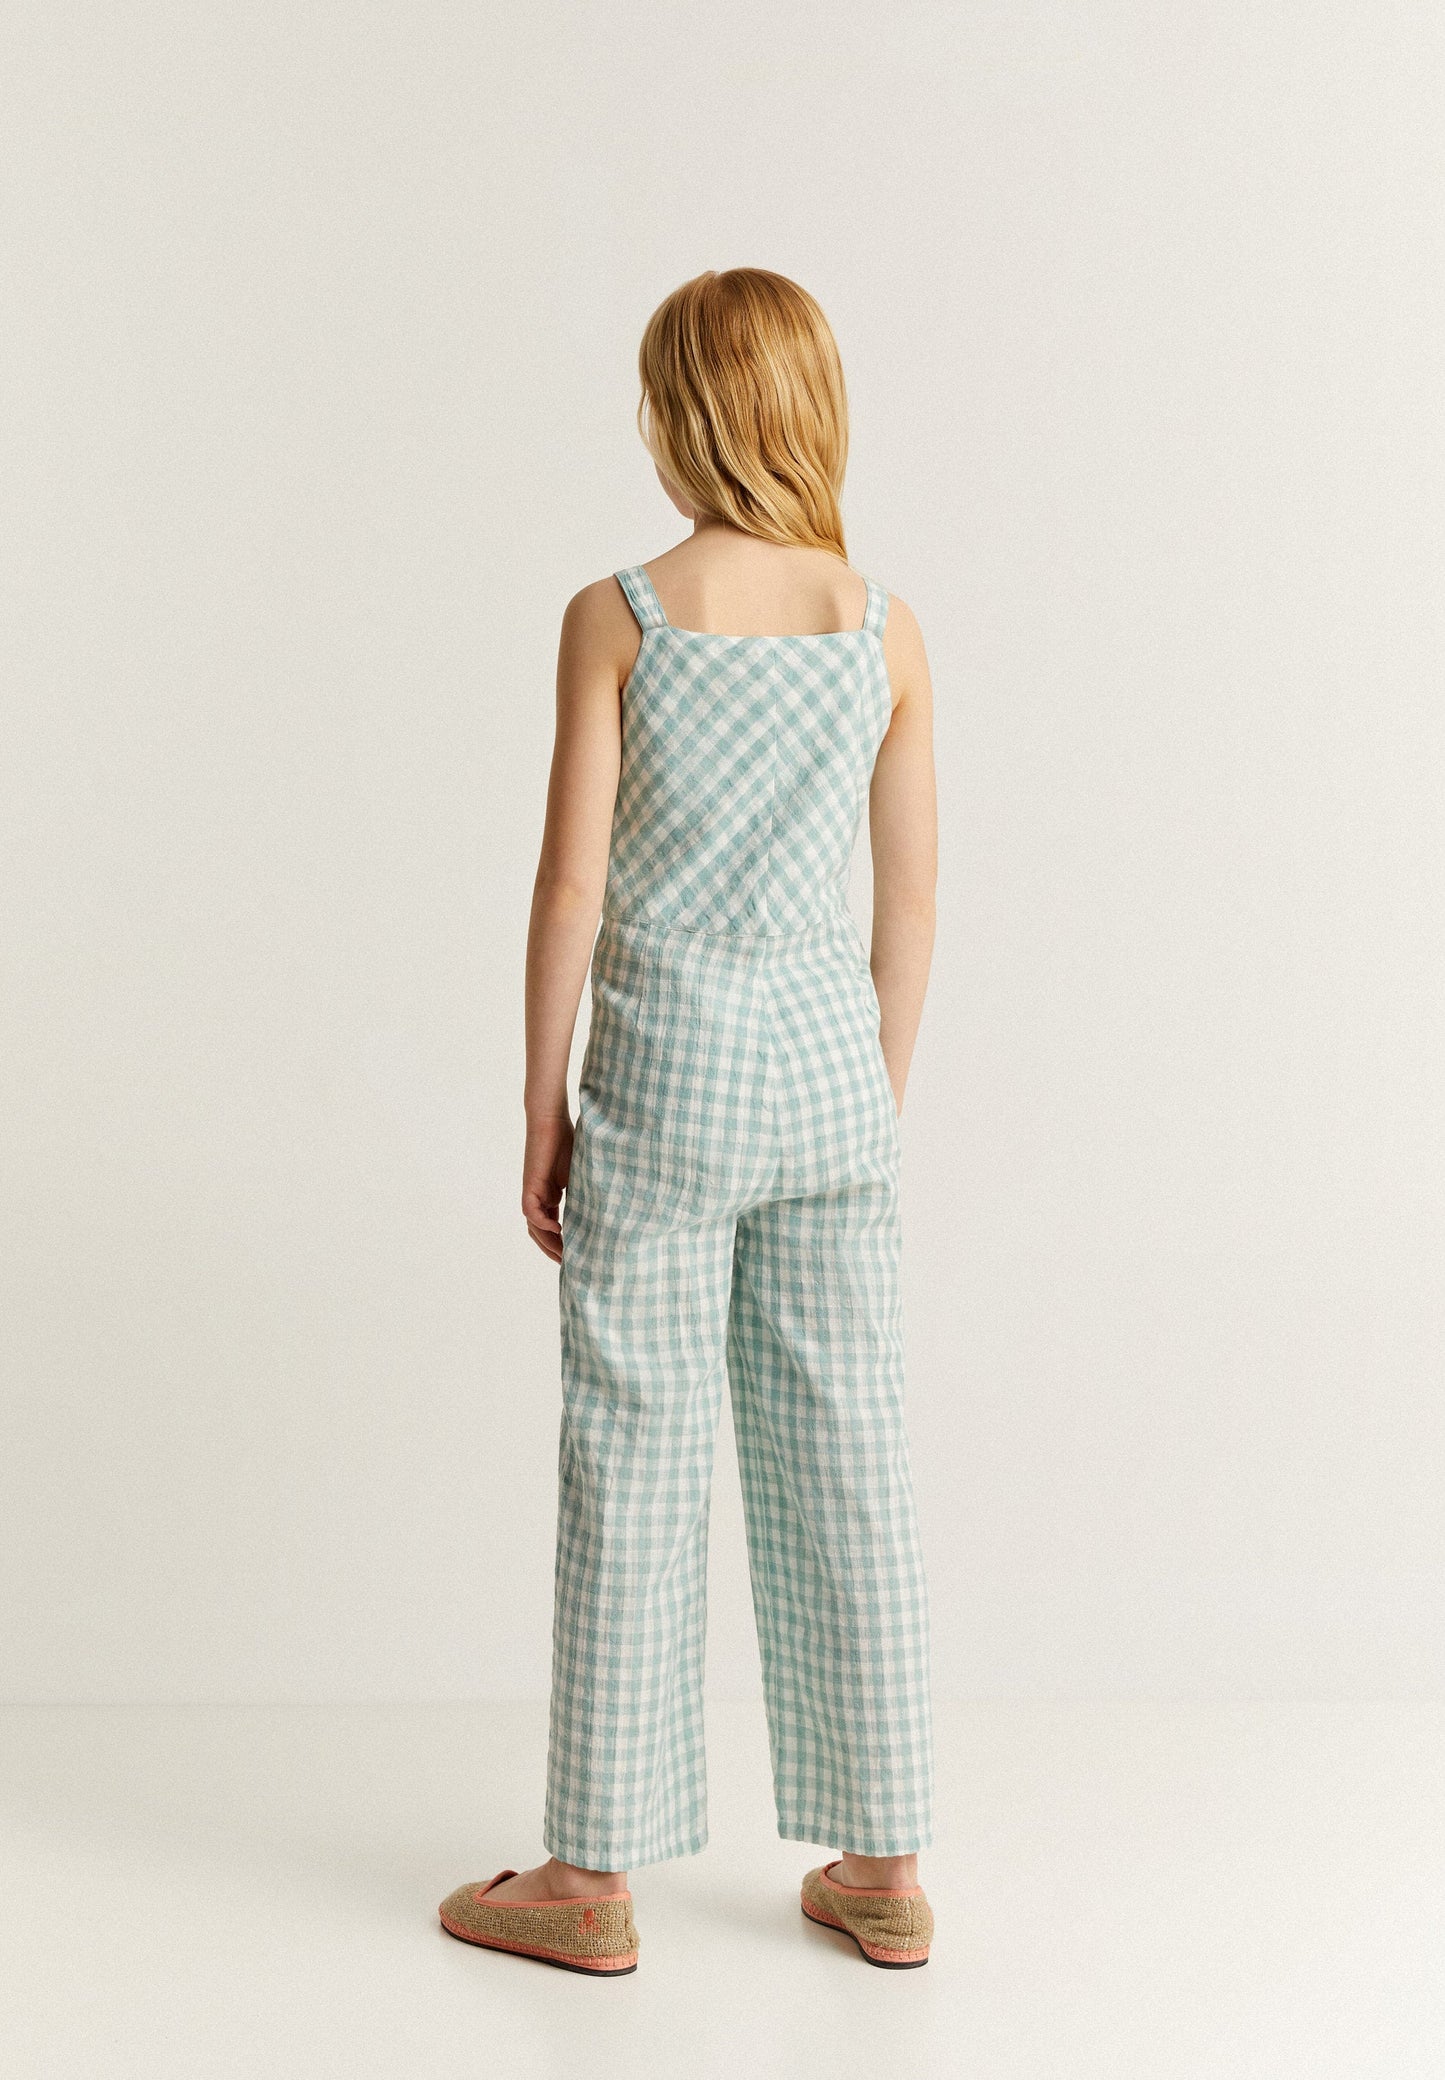 TEXTURED GINGHAM DUNGAREES